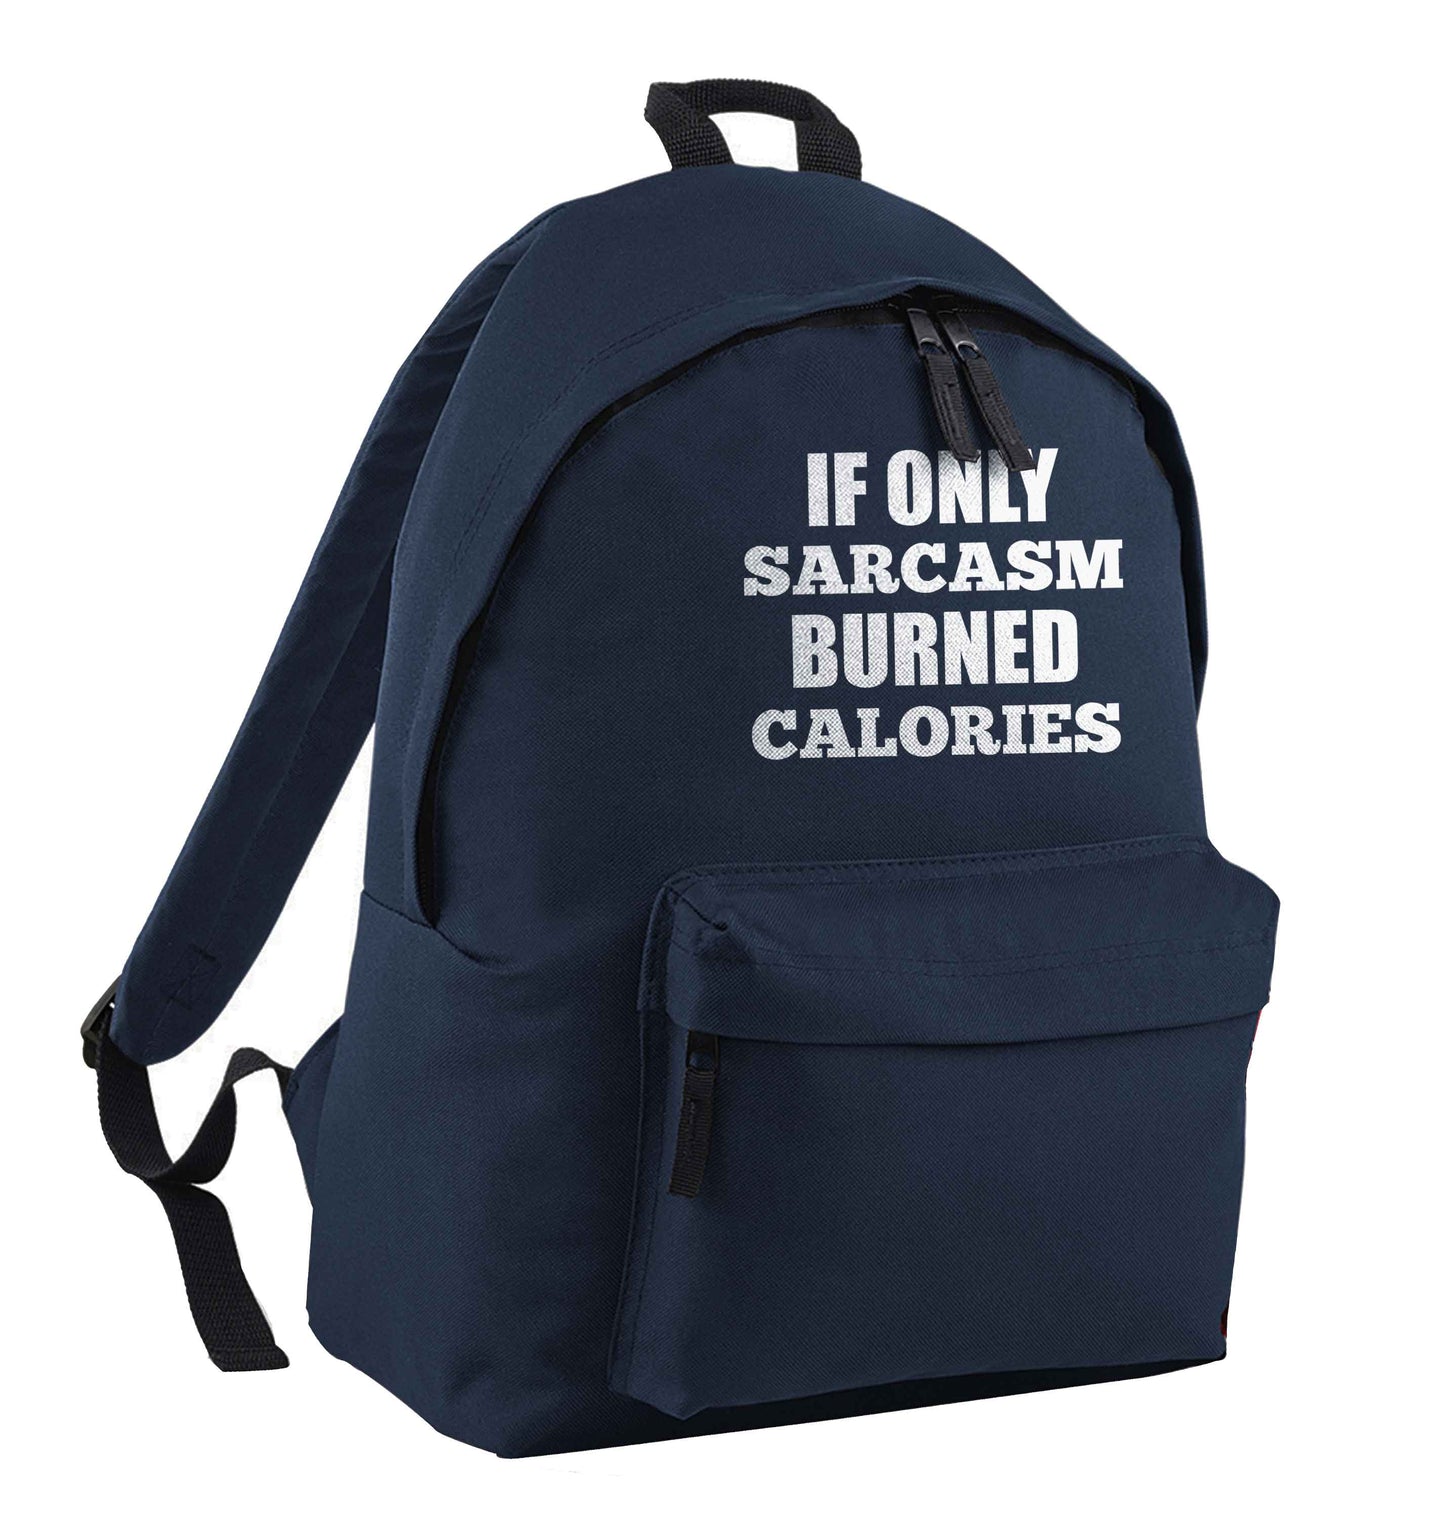 If only sarcasm burned calories navy adults backpack